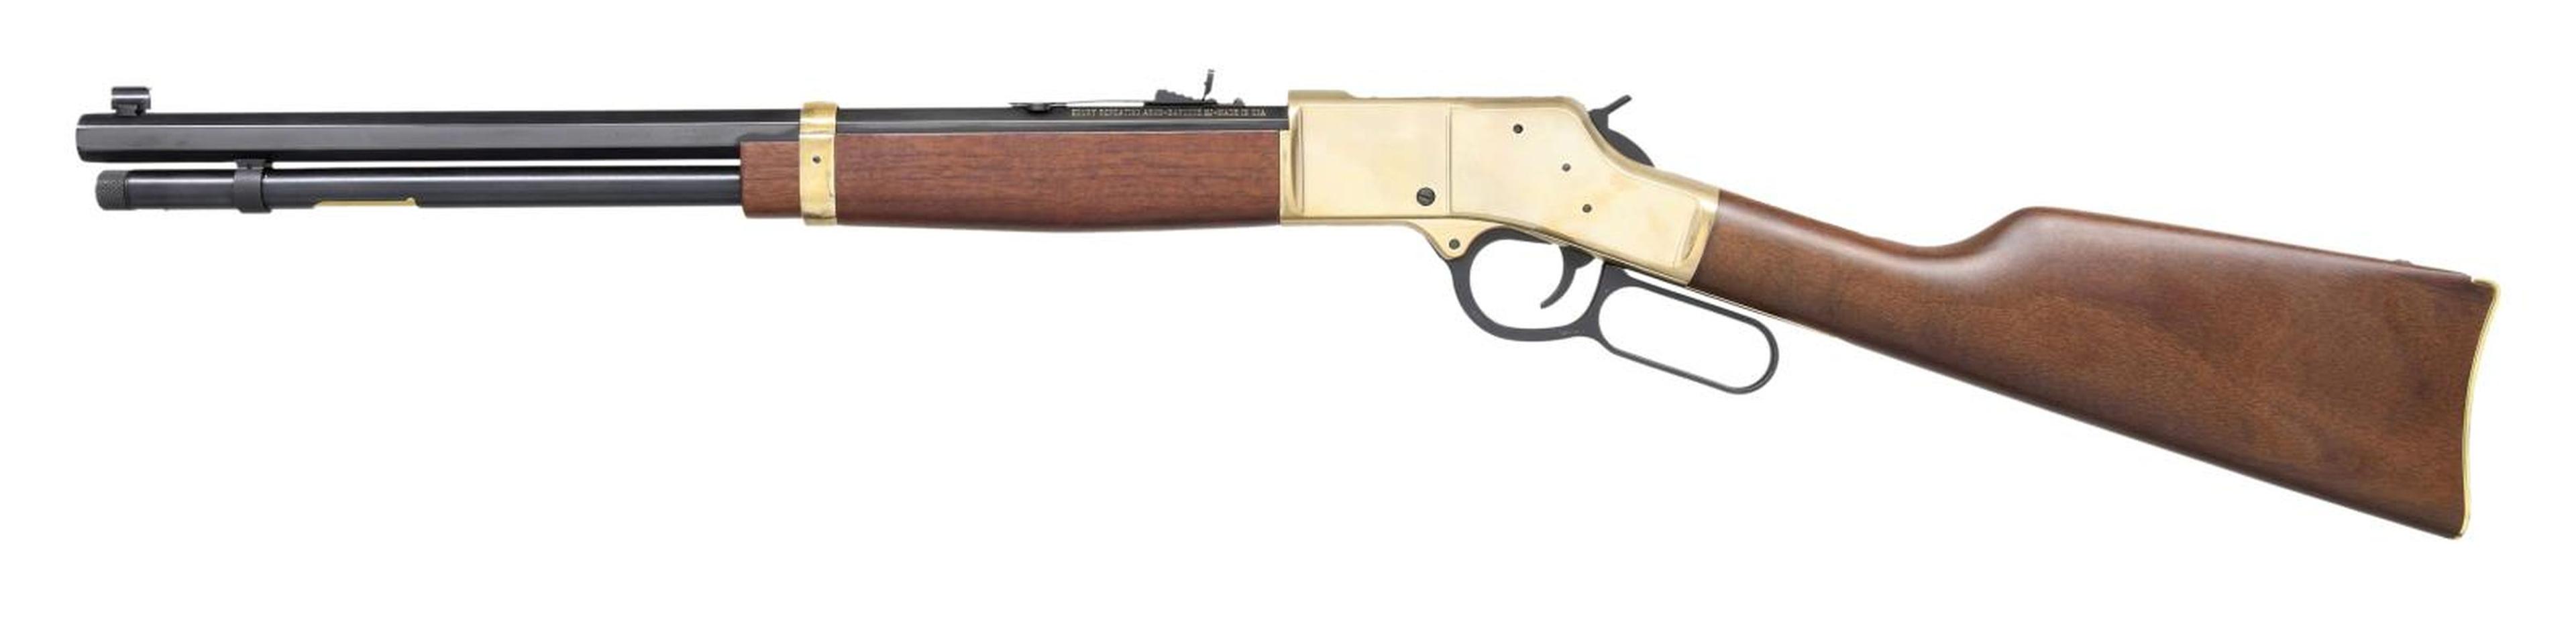 HENRY REPEATING ARMS MODEL H006C "BIG BOY" LEVER